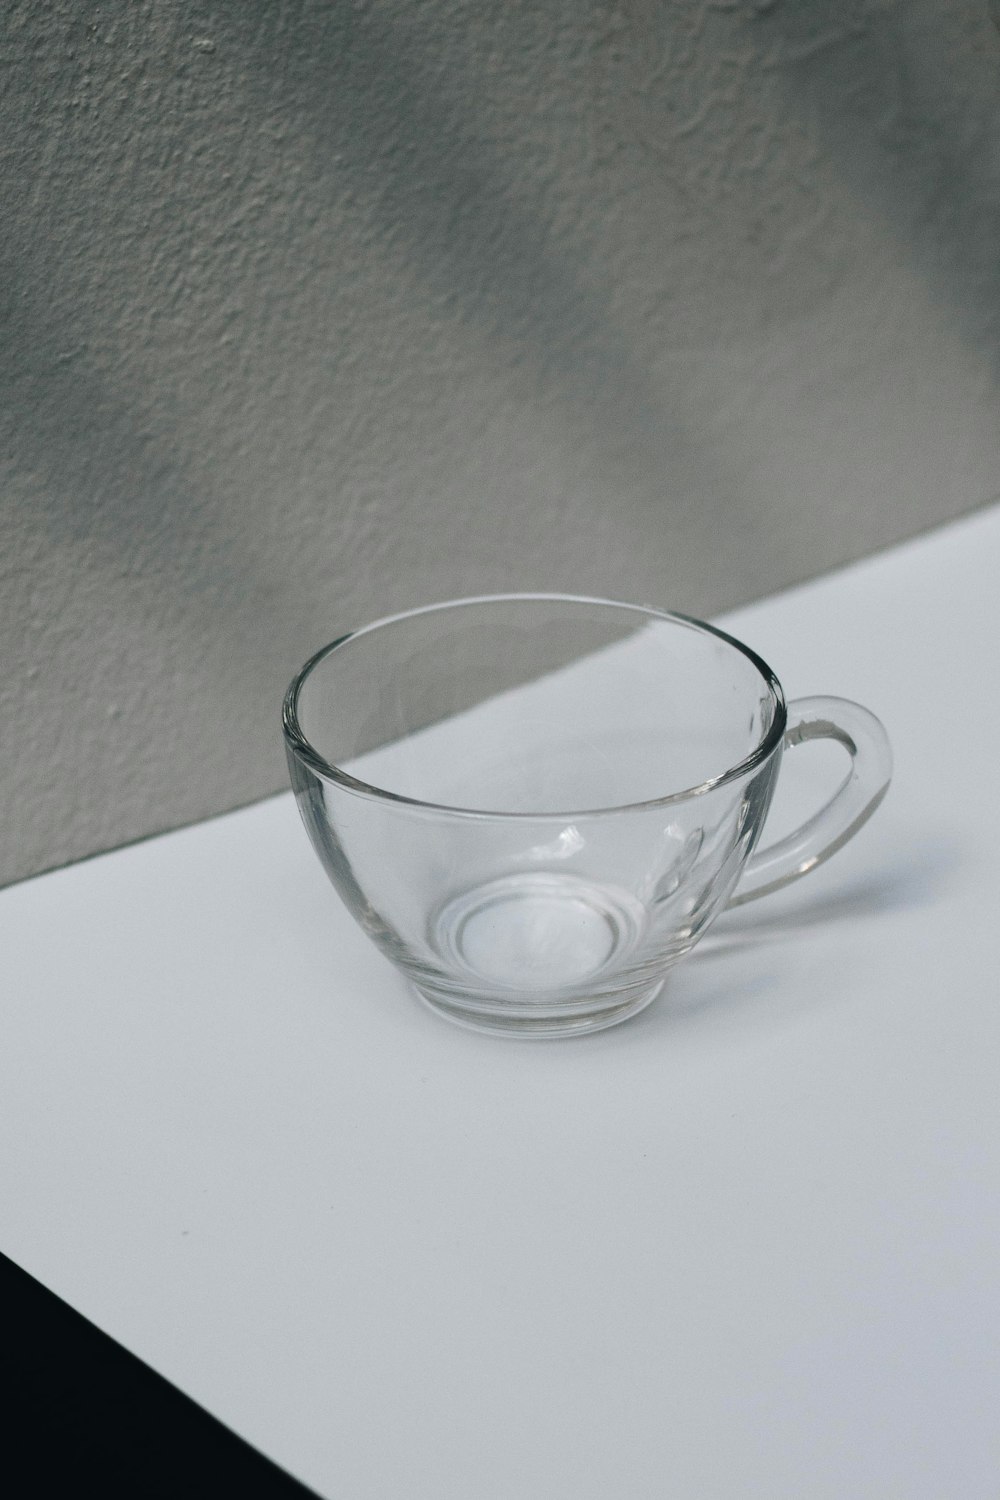 clear glass cup on white table